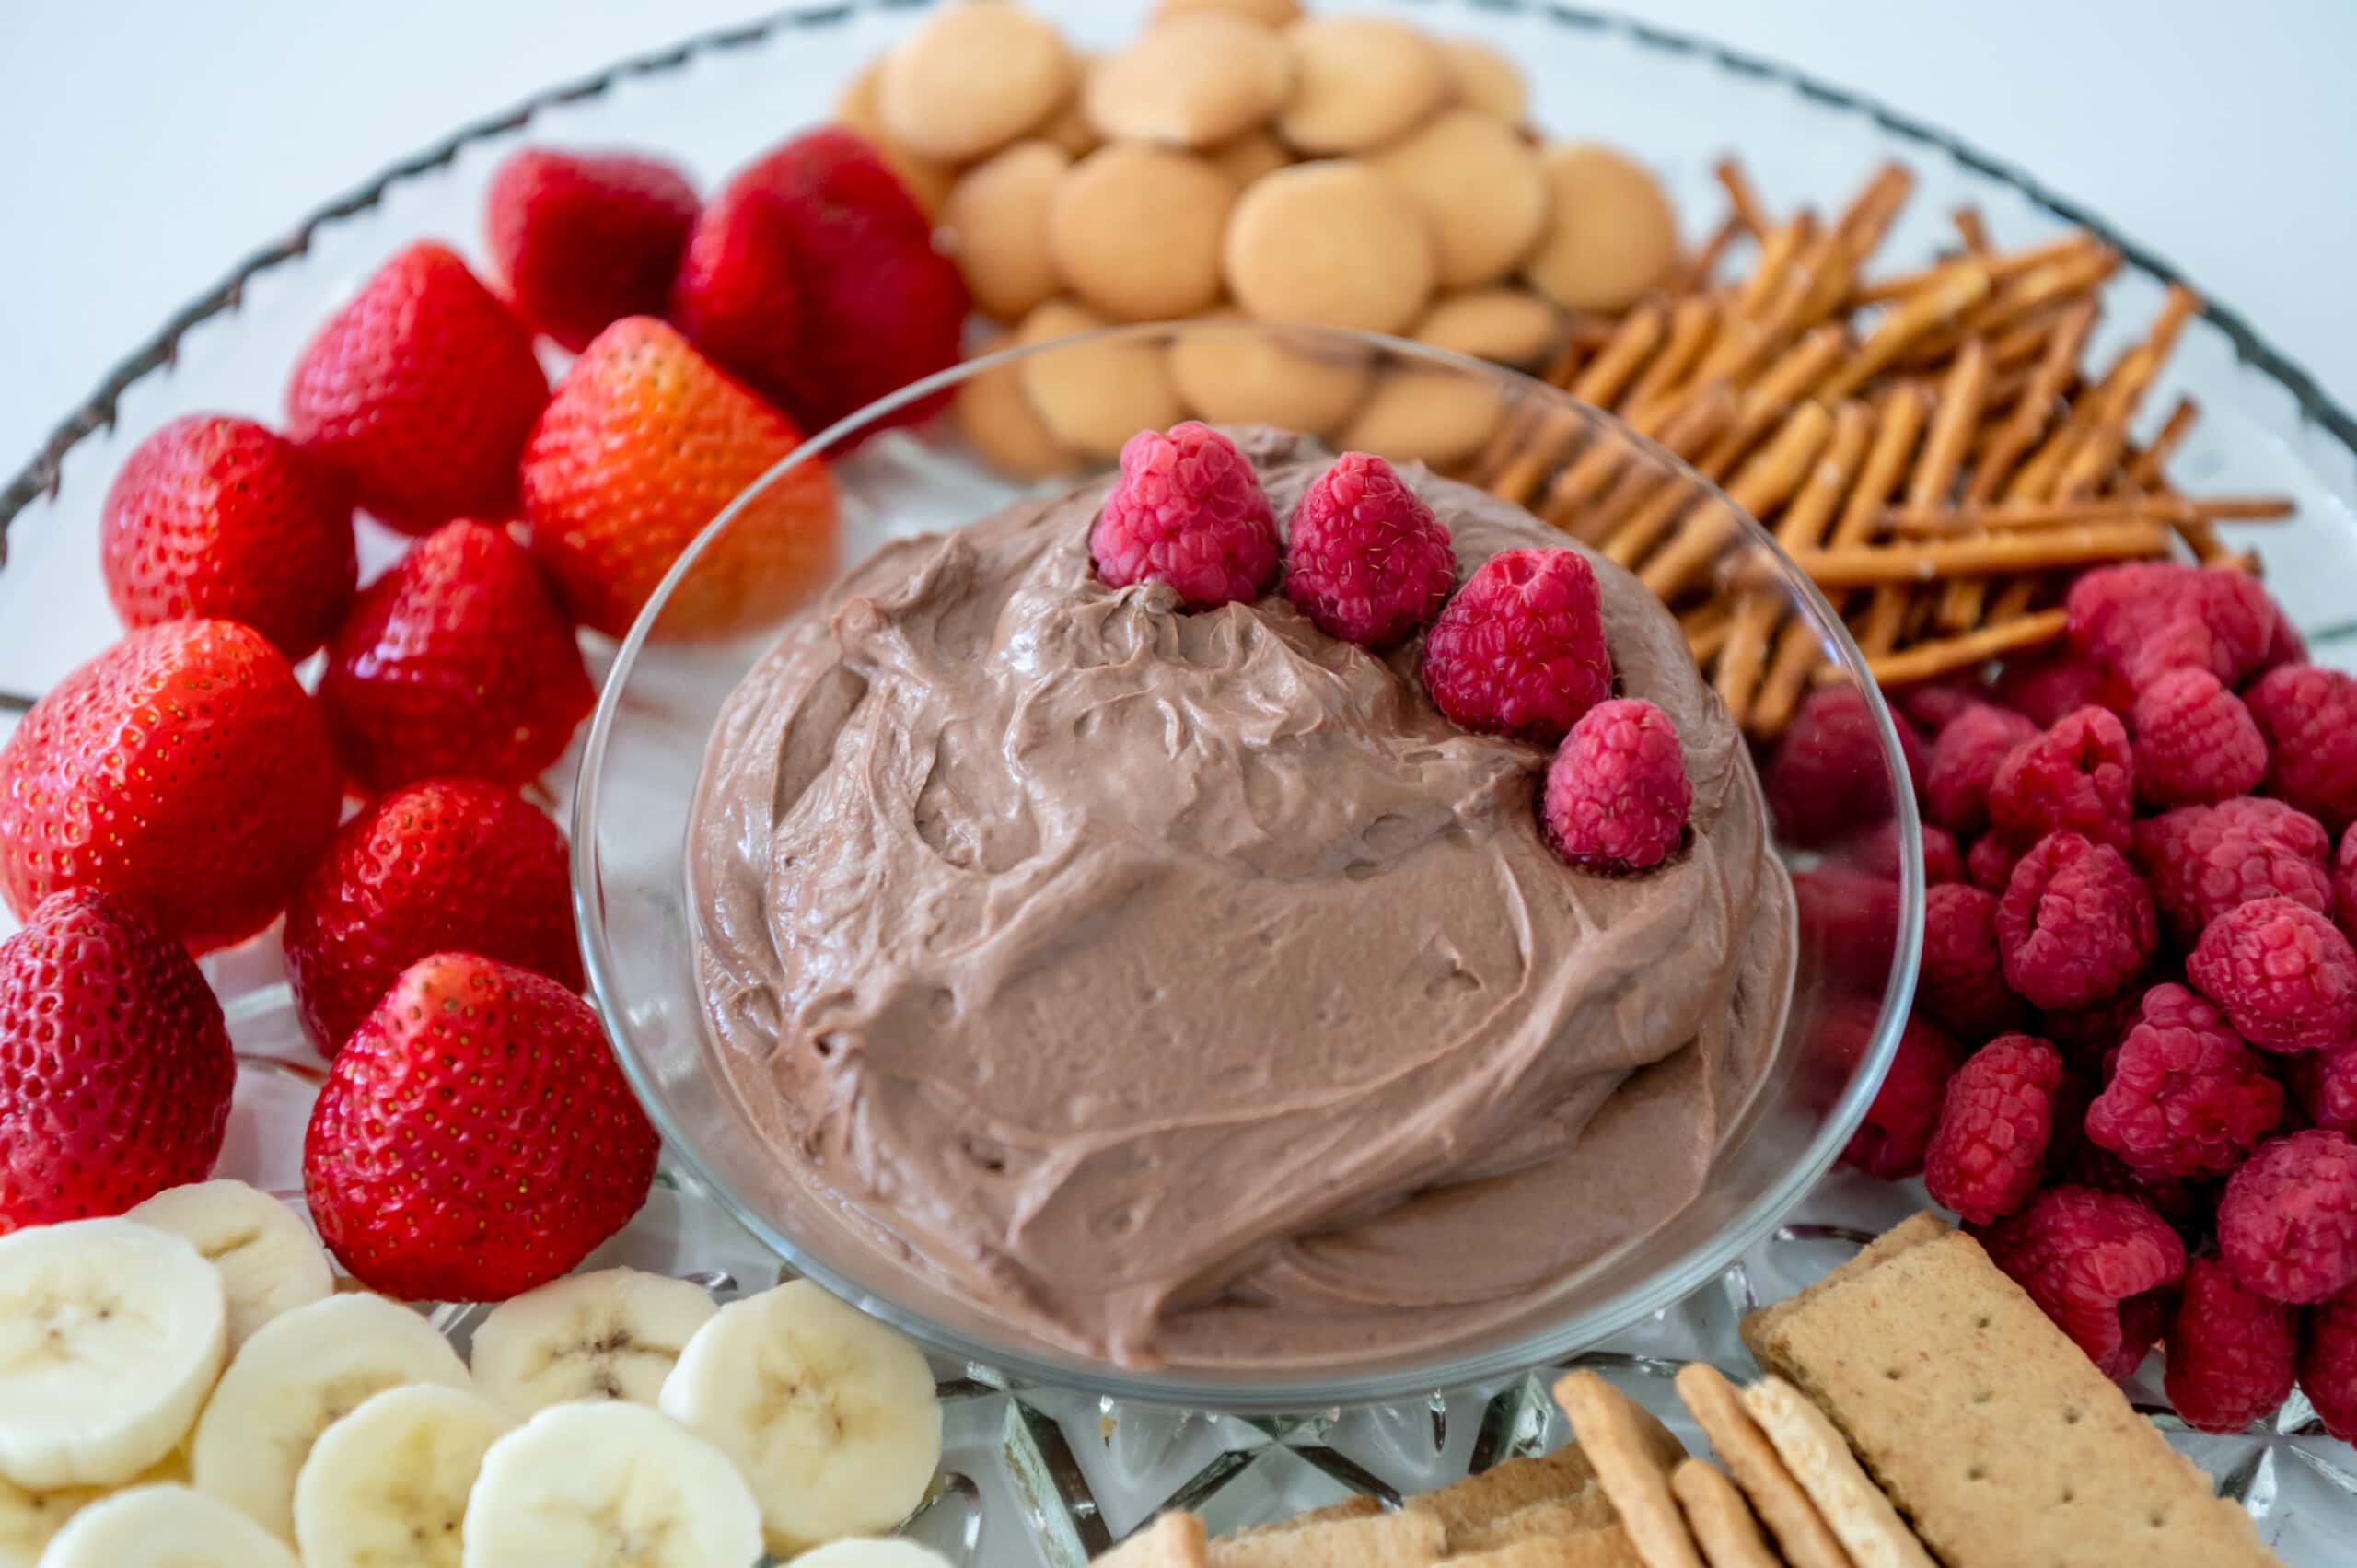 Close up of a glass bowl filled with a chocolate peanut butter dip with some raspberries on top. It's surrounded by fruits, cookies, and pretzels on a large dish.